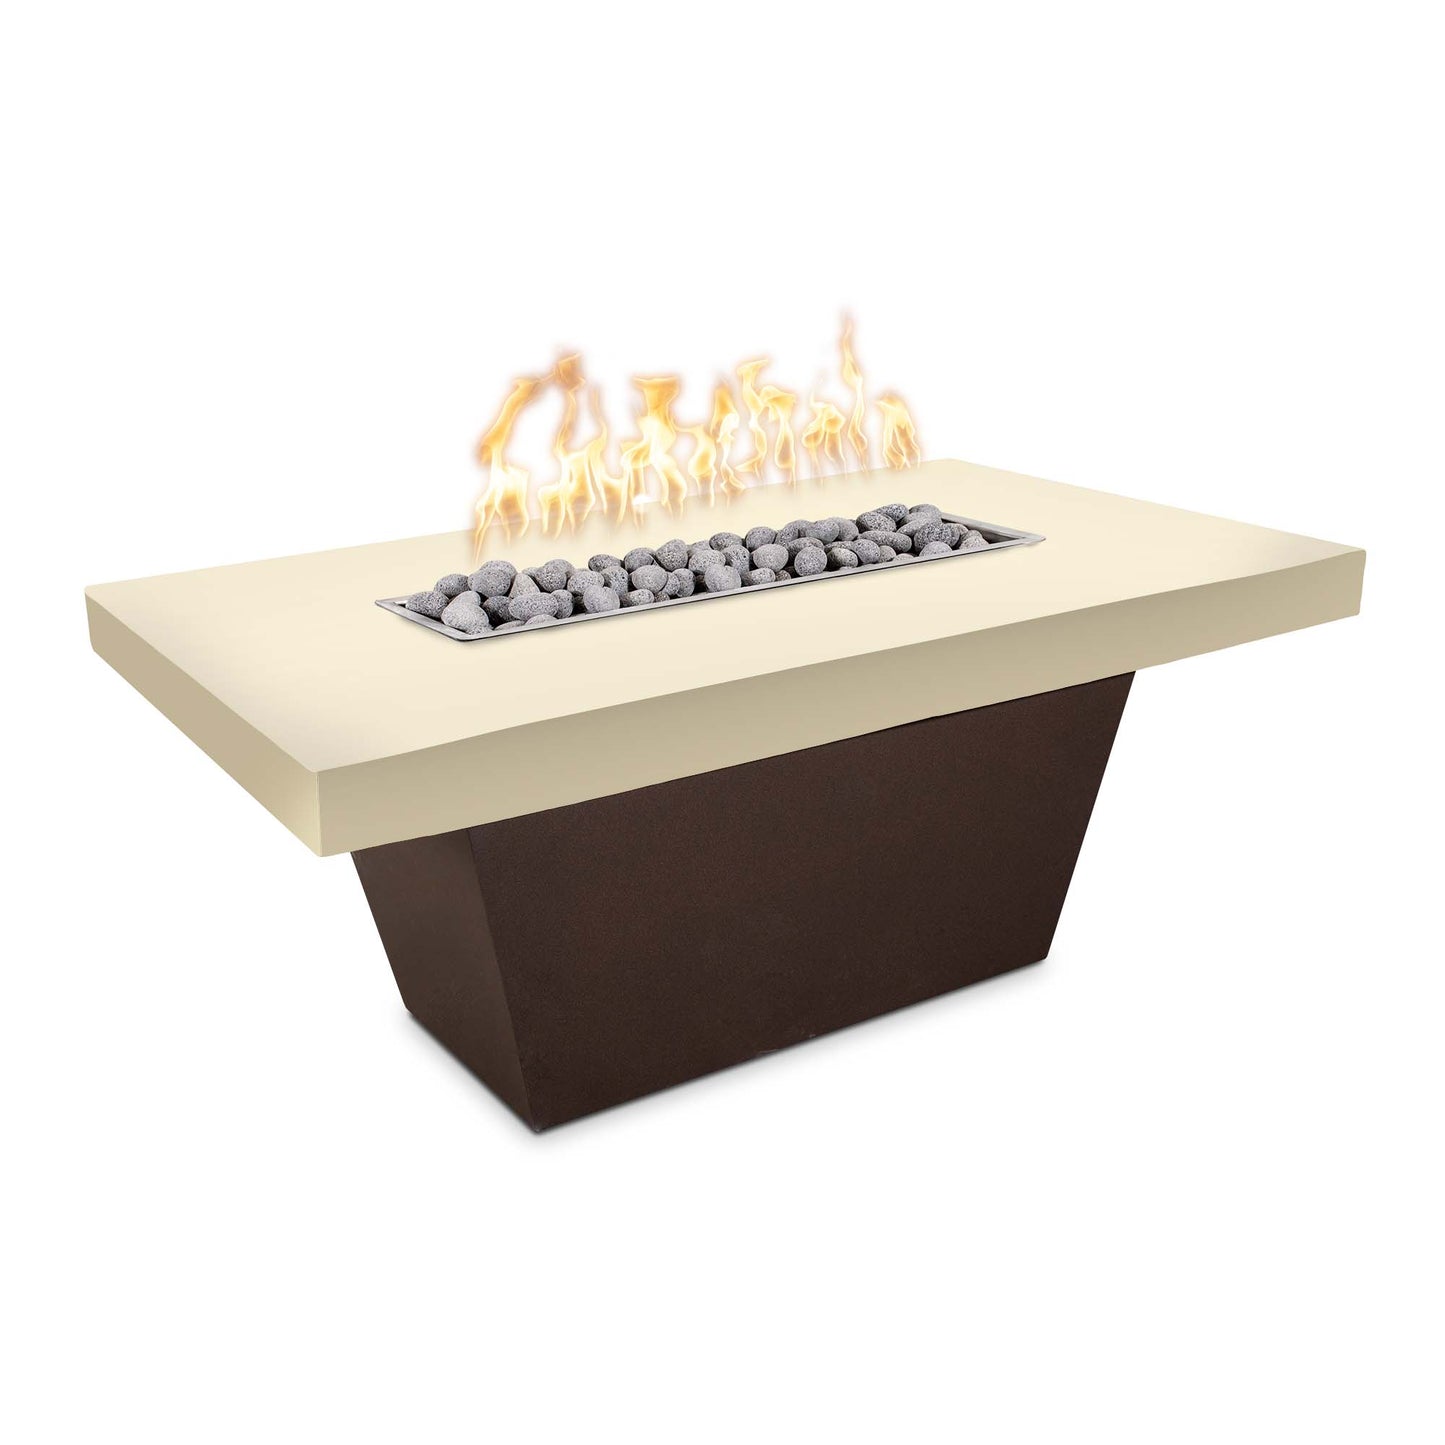 The Outdoor Plus Tacoma 48" Rustic White Concrete Top & Black Powder Coated Base Natural Gas Fire Table with Match Lit Ignition